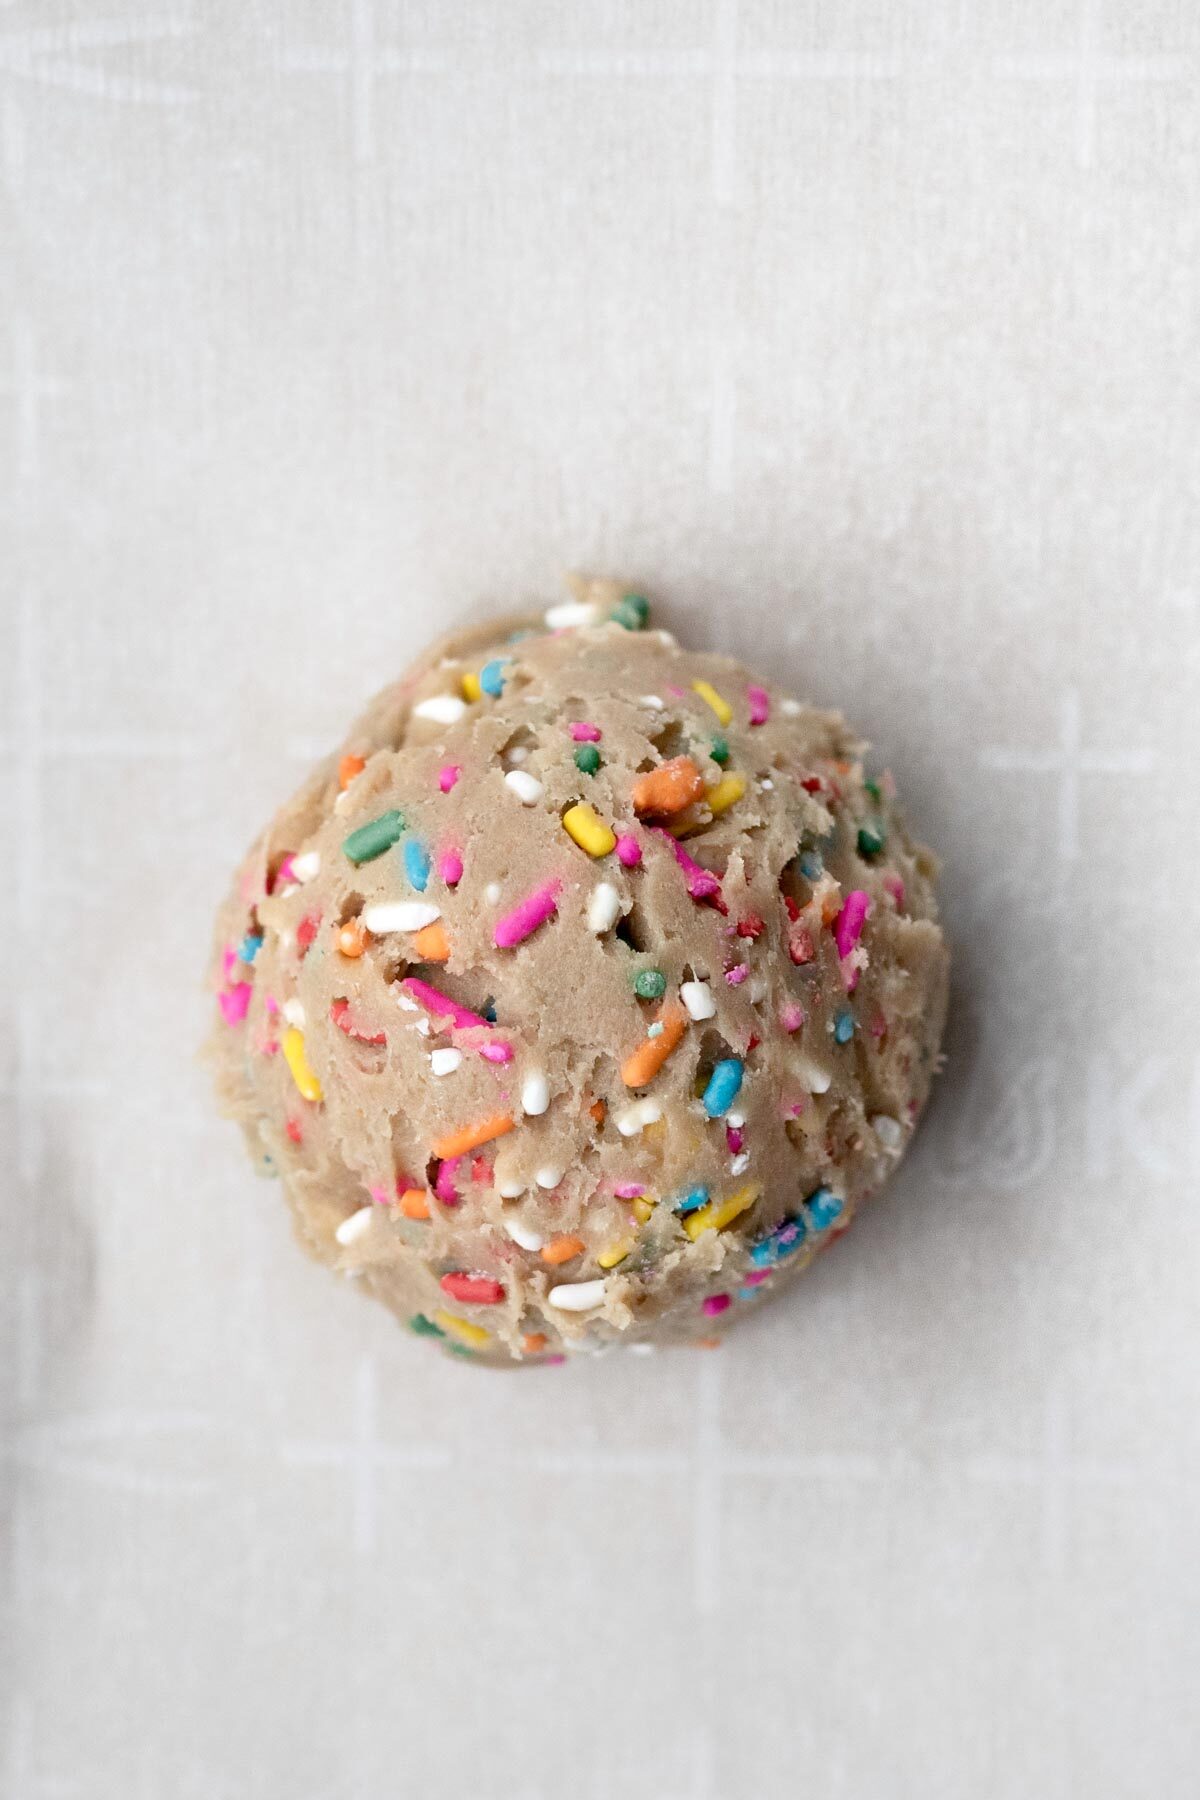 A ball of rainbow sprinkle infused dough.